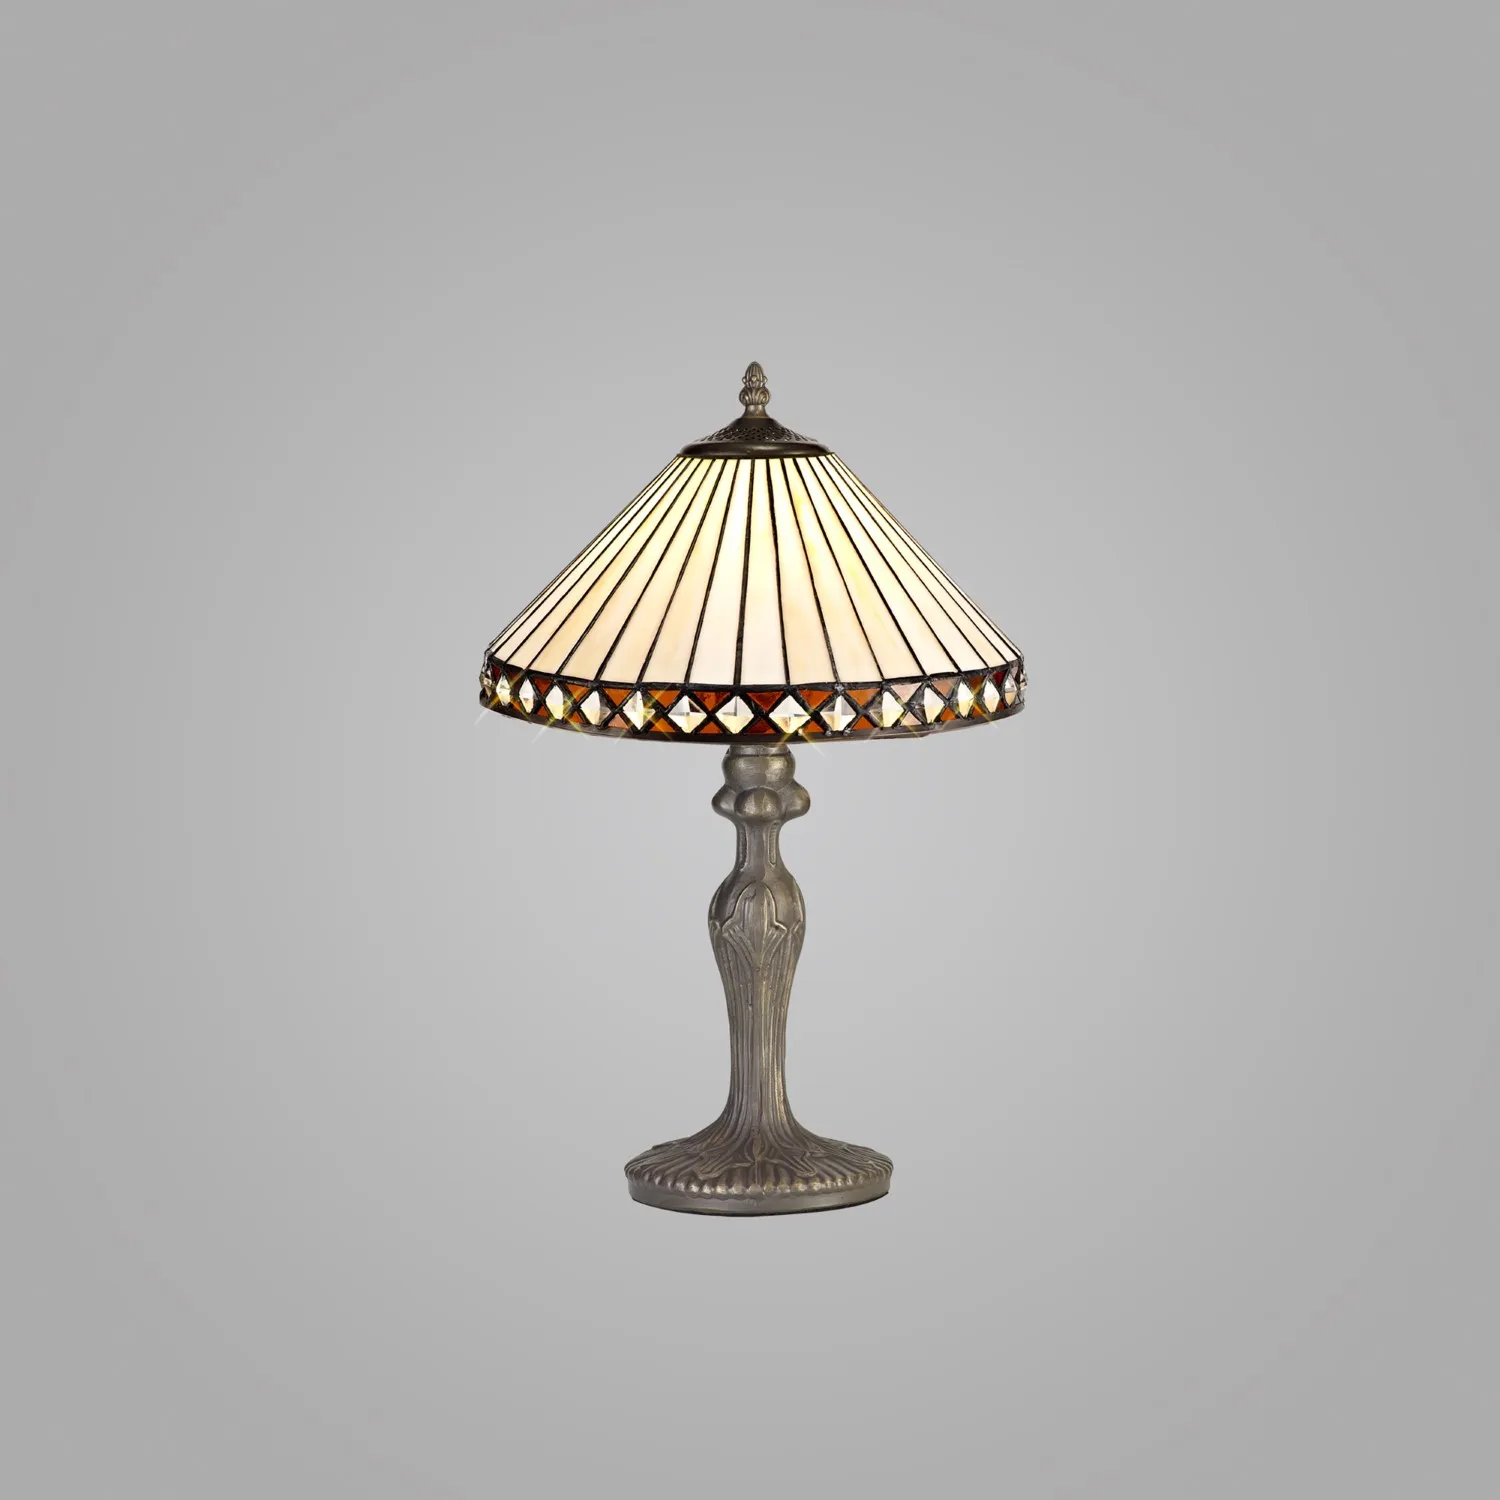 Rayleigh 1 Light Curved Table Lamp E27 With 30cm Tiffany Shade, Amber Cream Crystal Aged Antique Brass